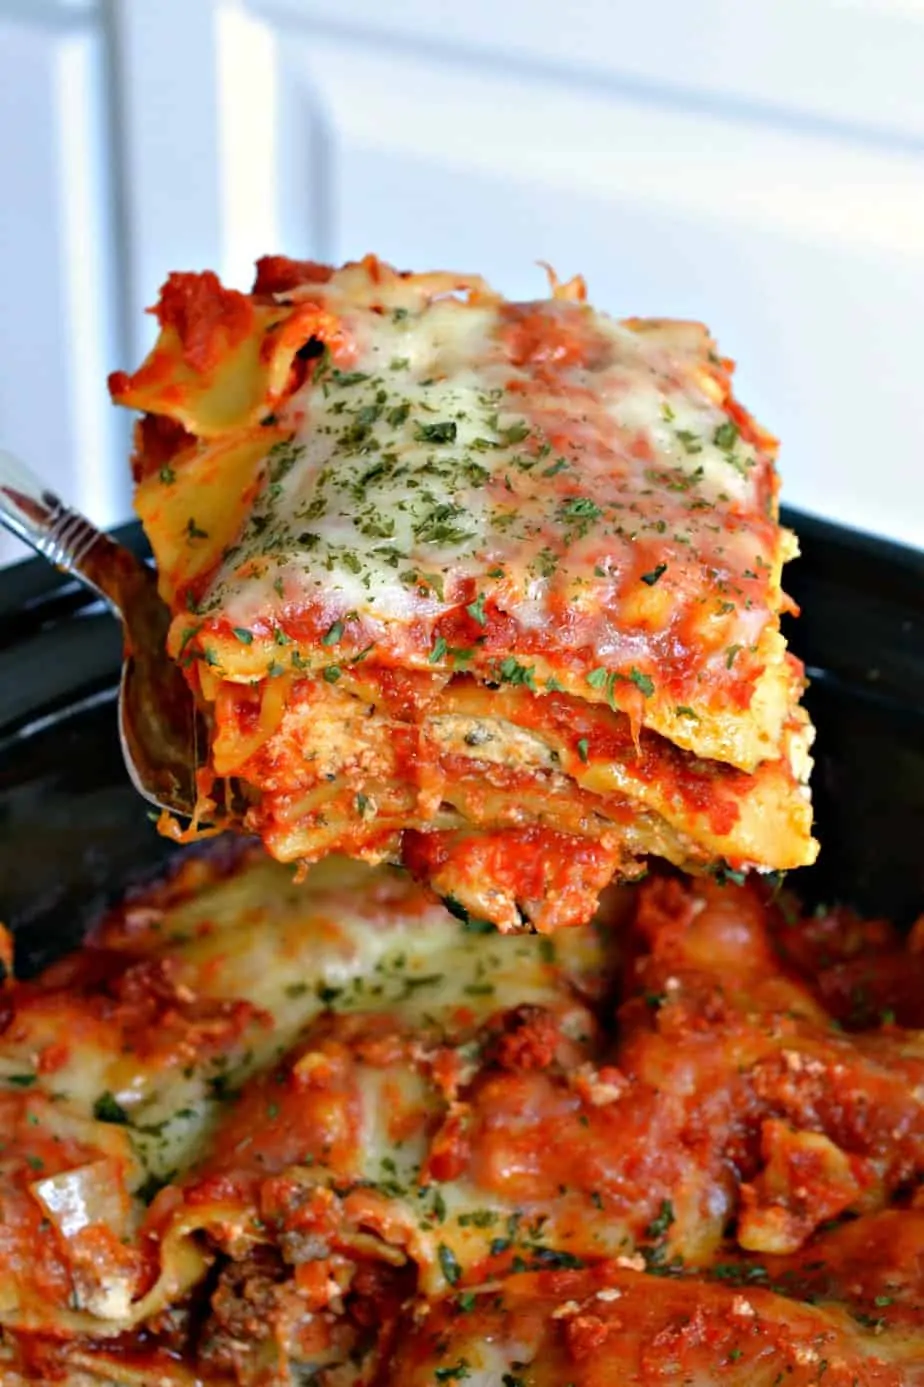 Crock Pot Lasagna is an easy family-friendly recipe cooked right in your slow cooker